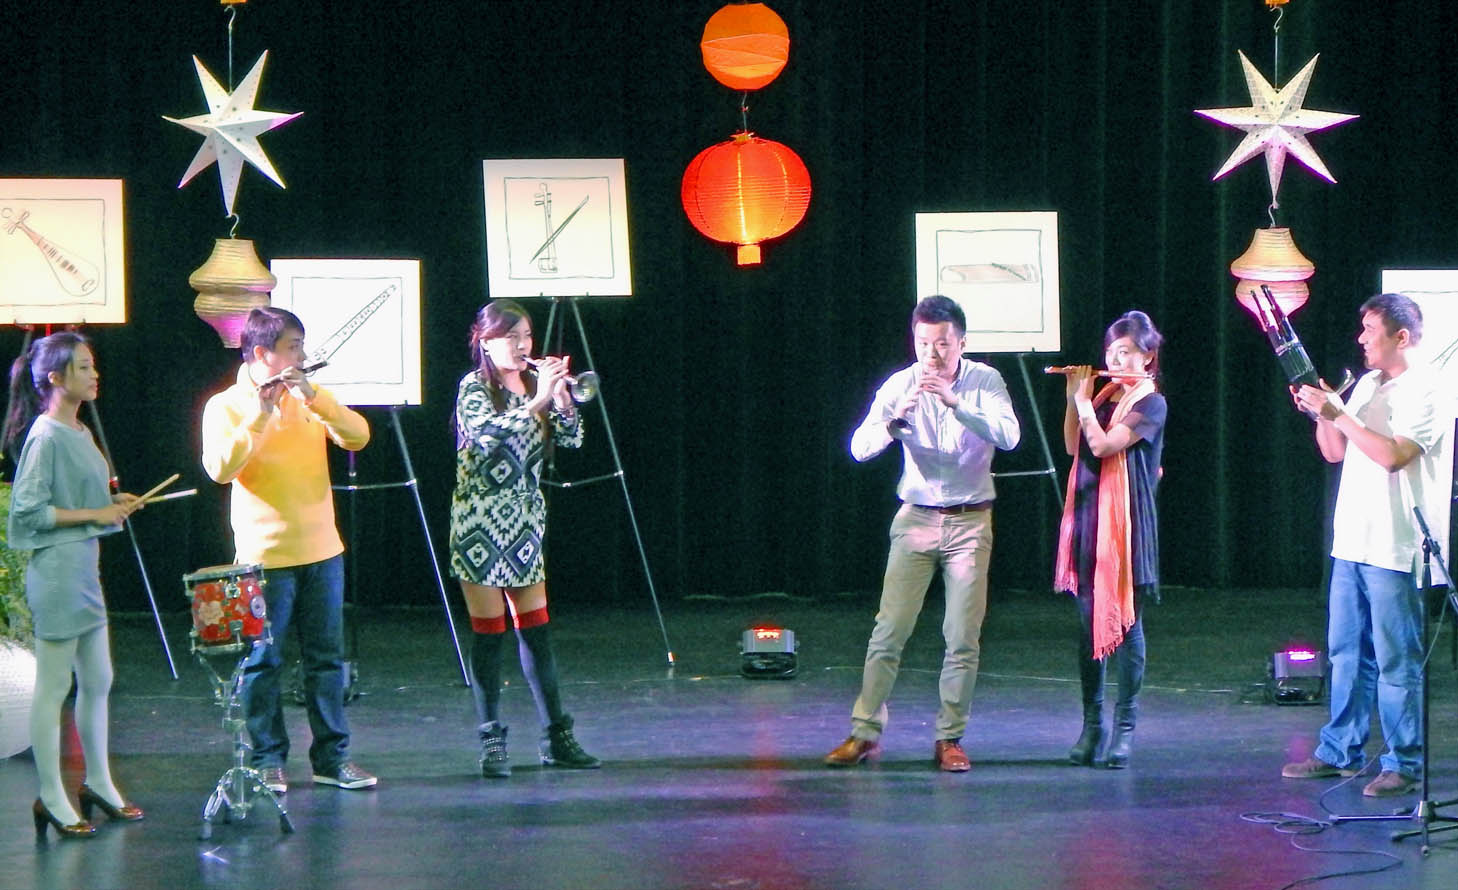 CCCC hosts China National Orchestra members' lecture, performance